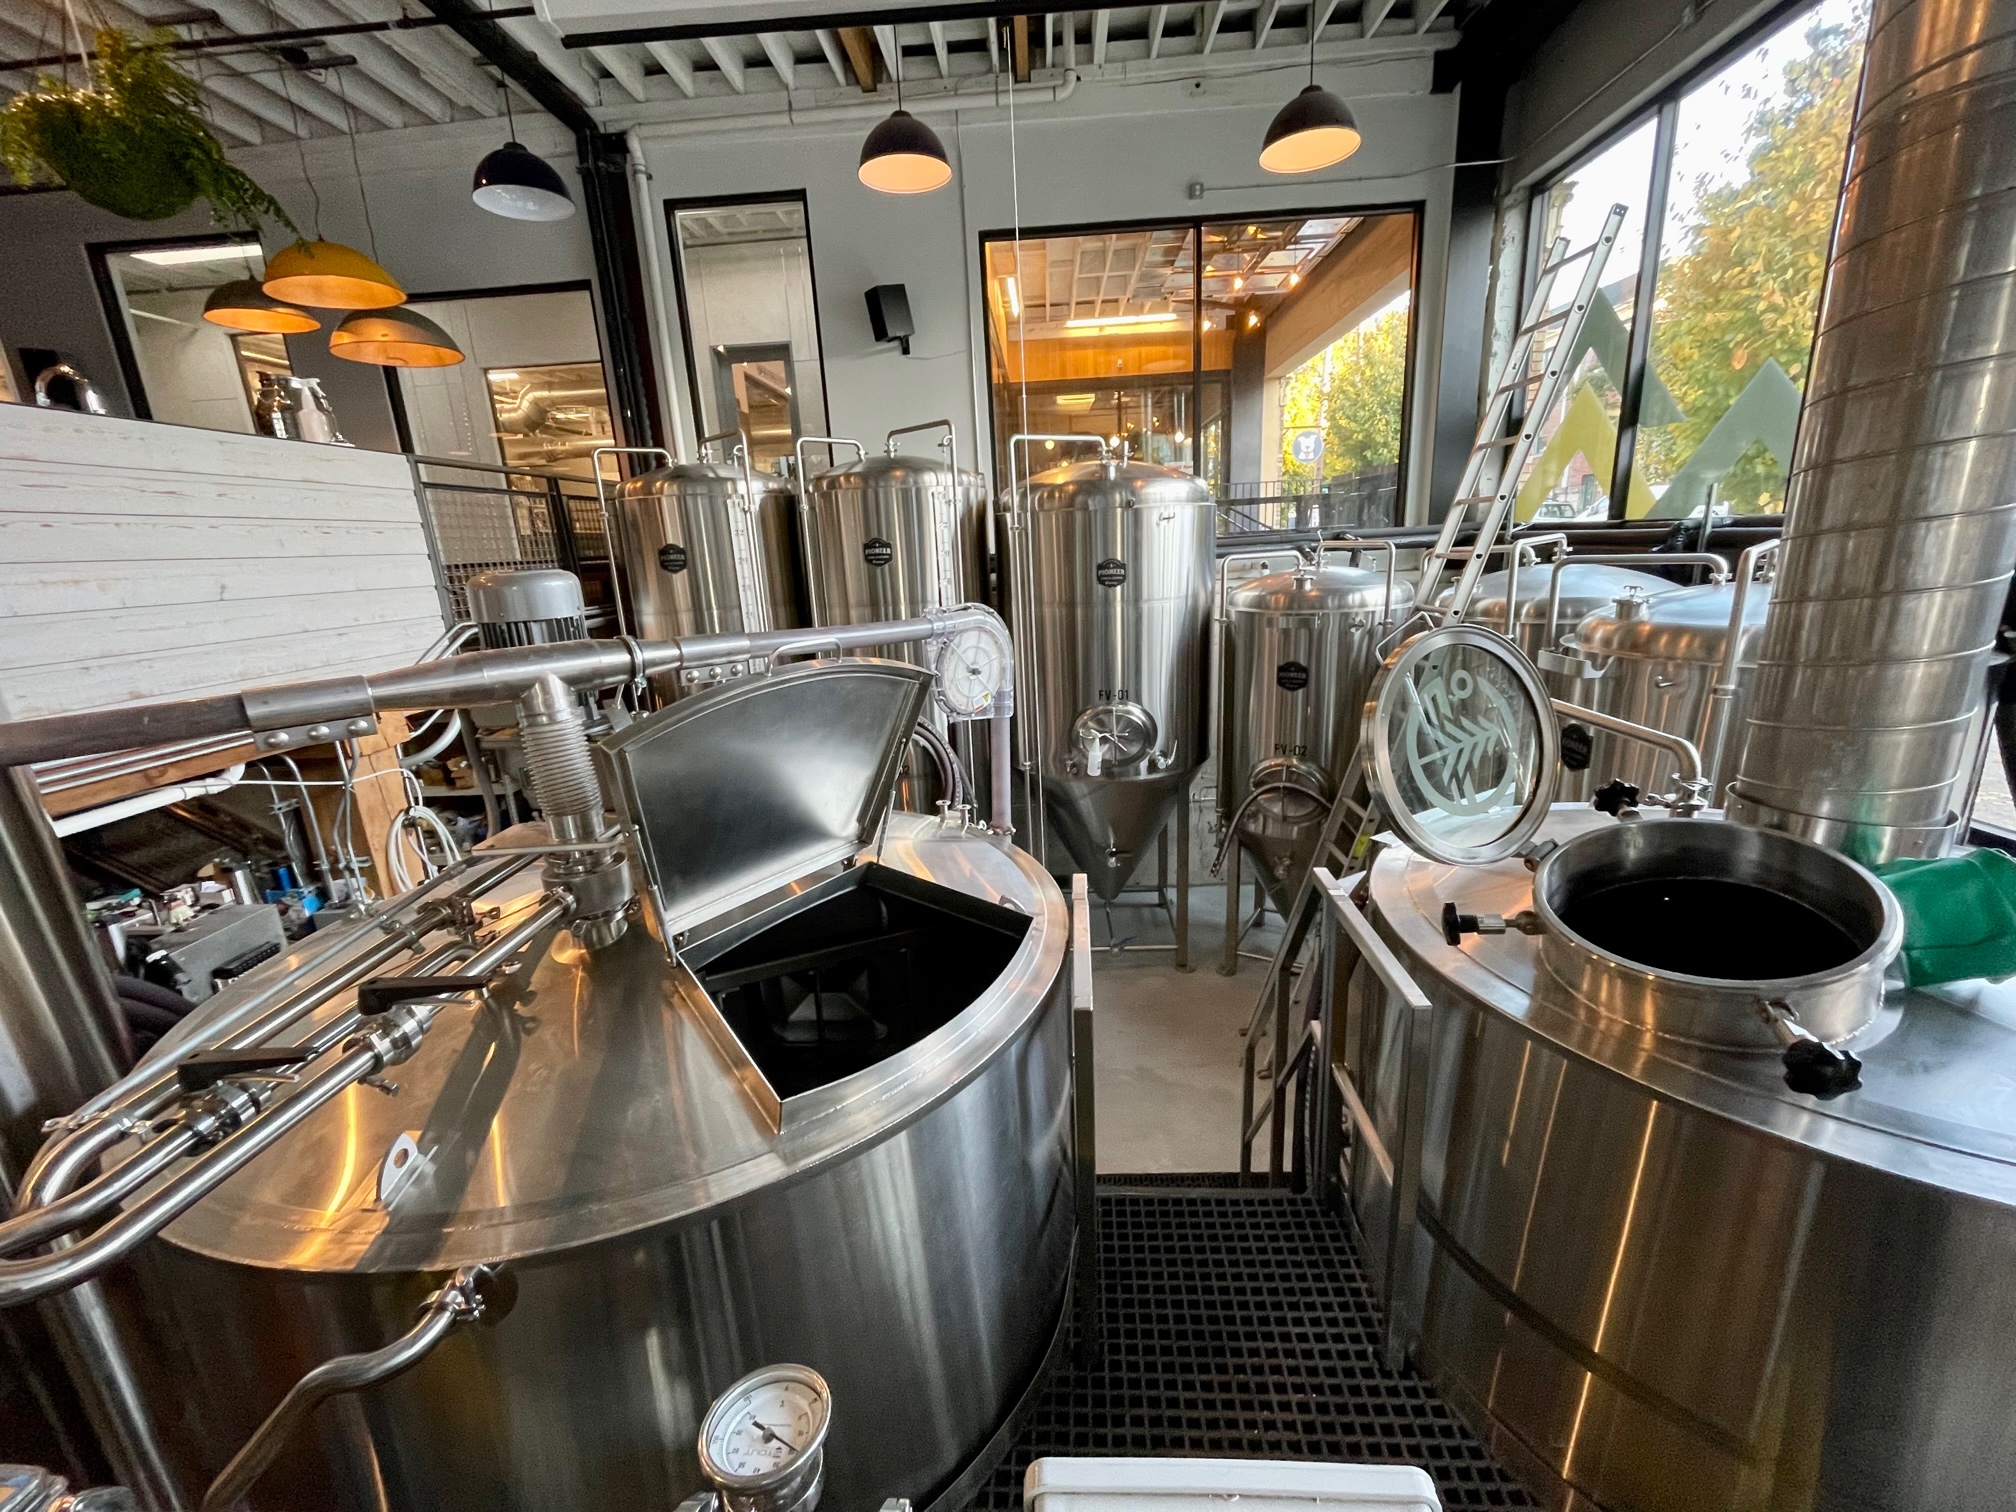 Patrons can grab a view of the 15-barrel brewhouse at Grand Fir Brewing.